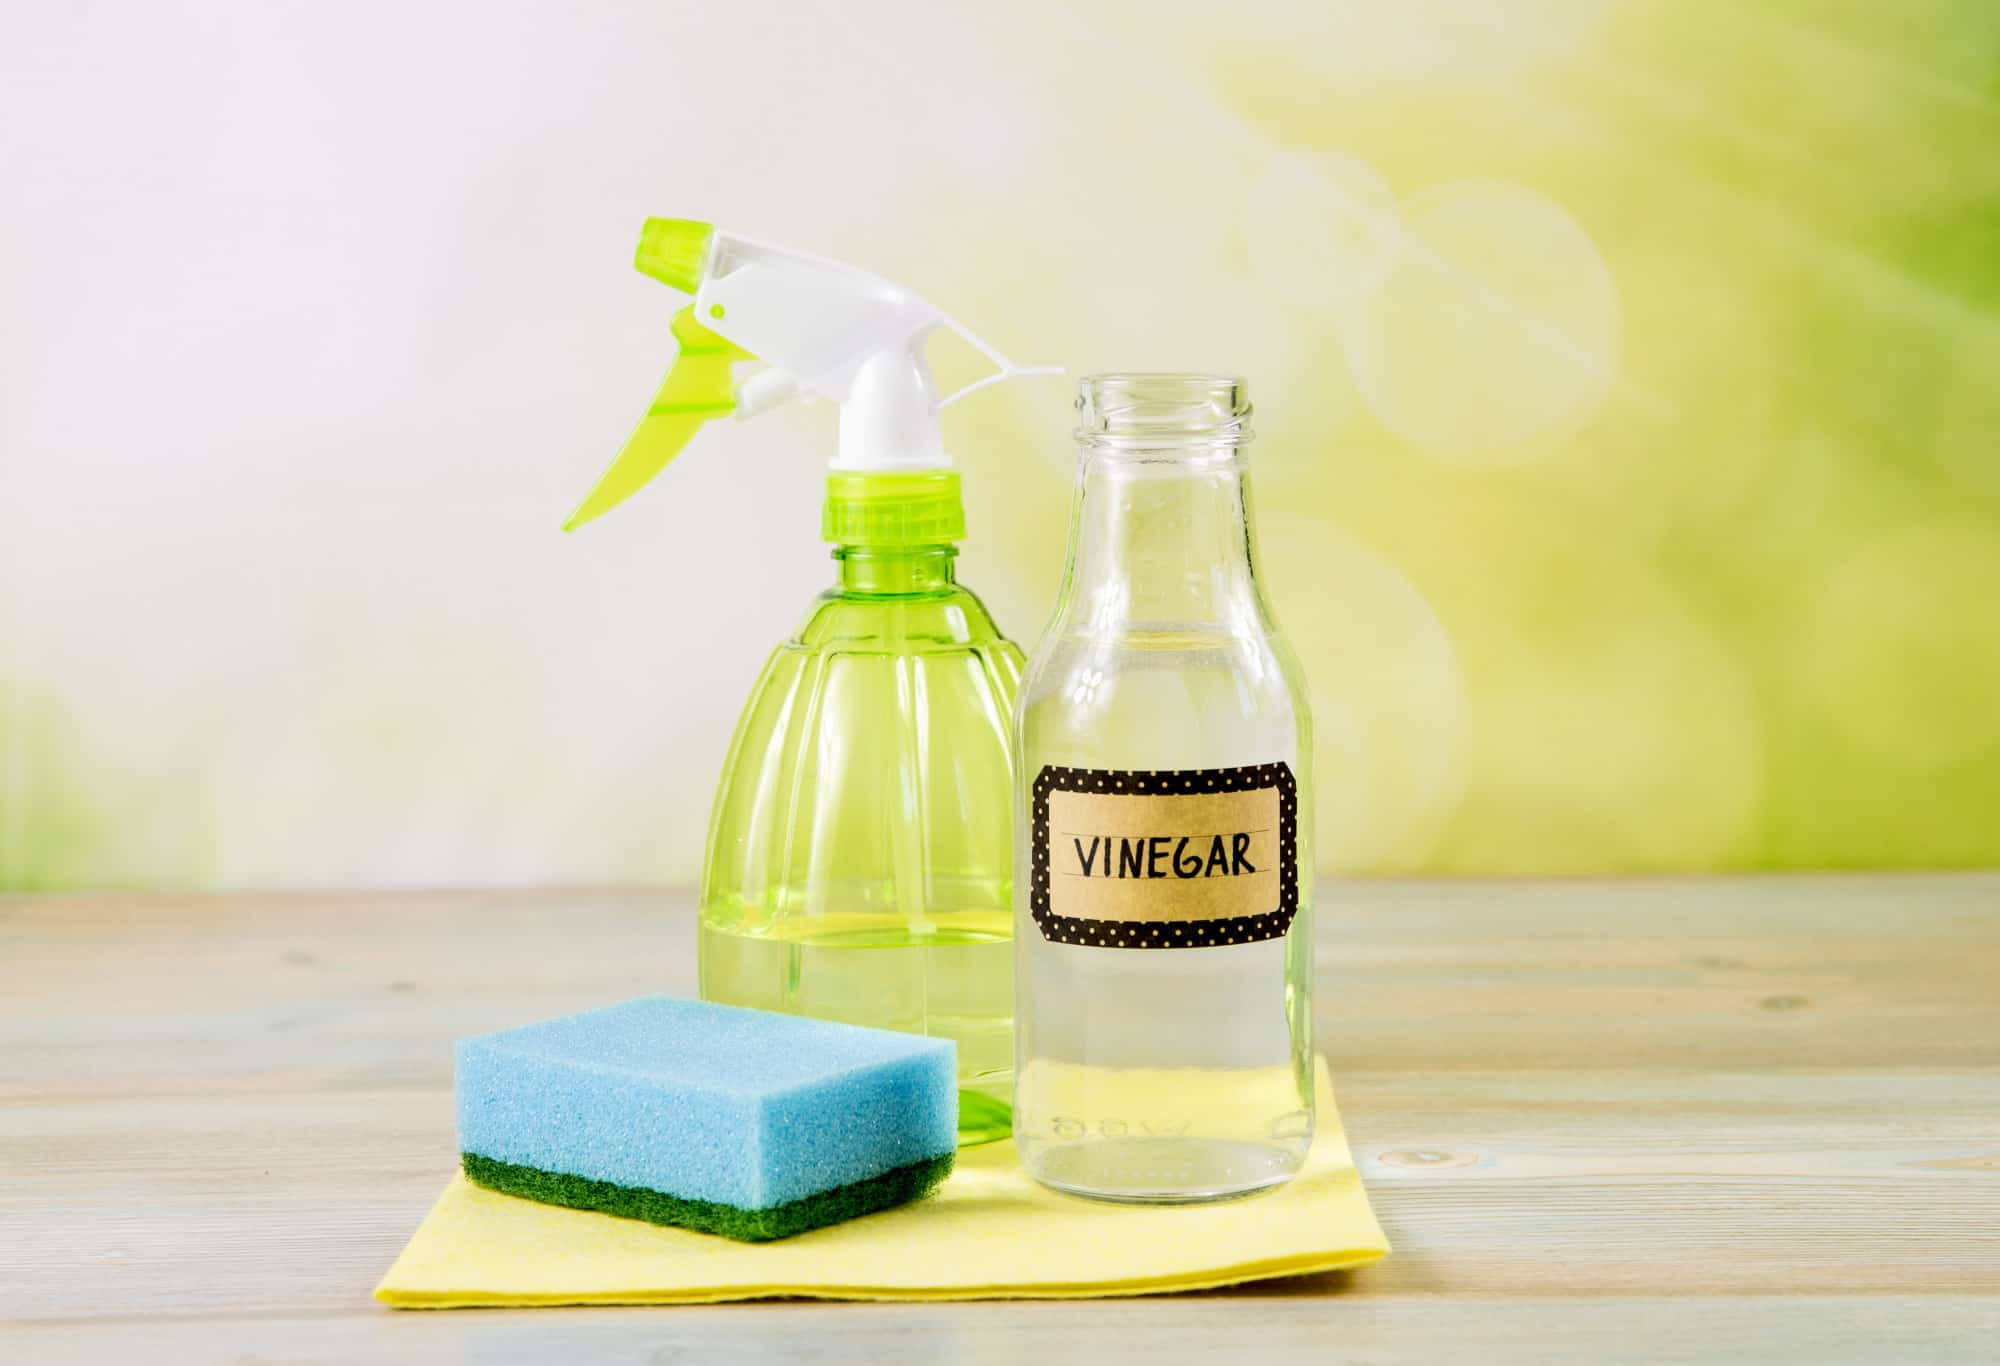 A spray bottle, a bottle labeled vinegar, and a sponge on a wooden table against a green background